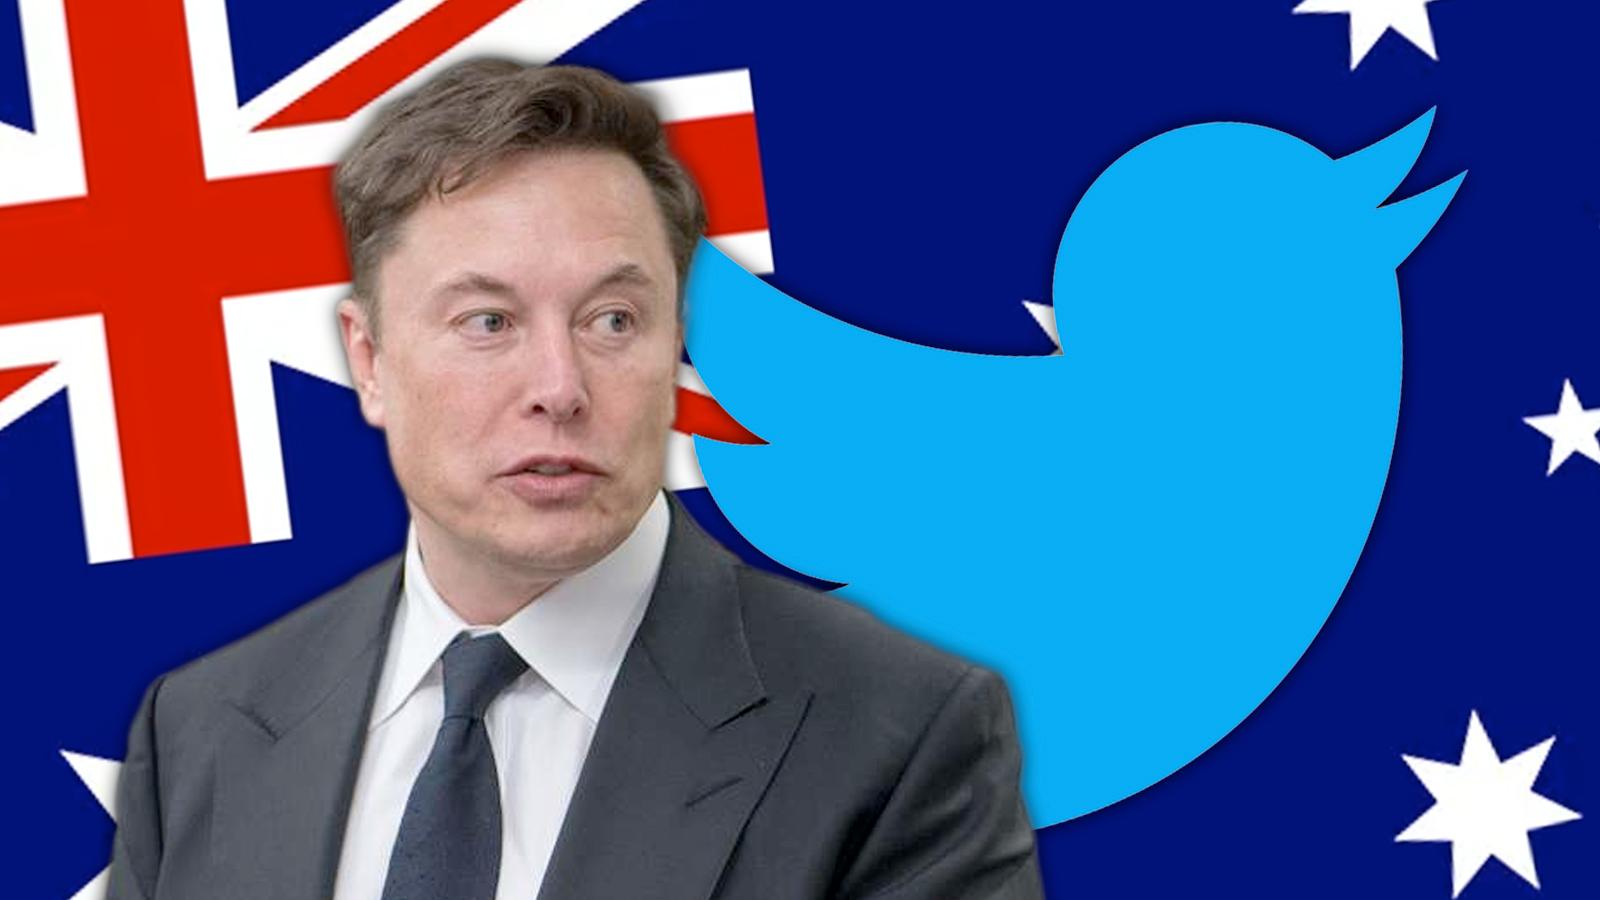 Elon Musk, head of Twitter and Australian flag in background with the Twitter logo